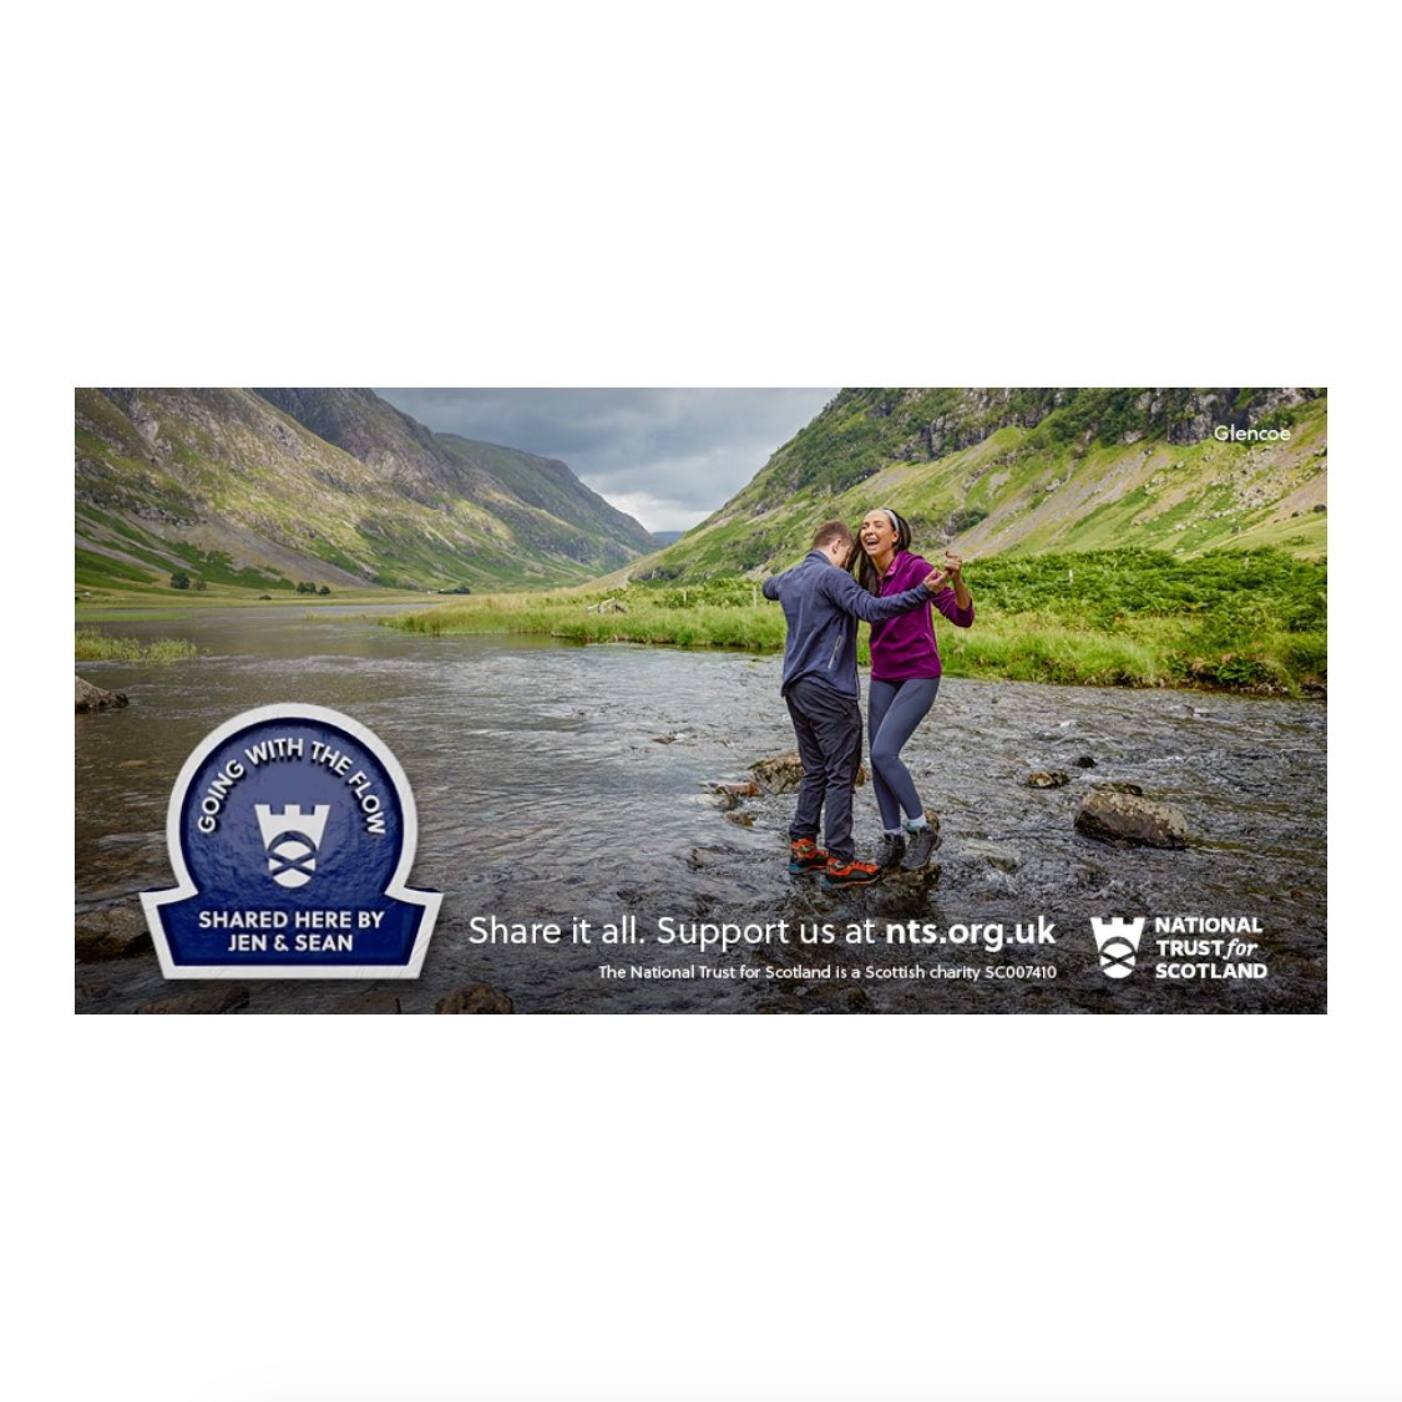 Good to see our kit on some great images for @nationaltrustforscotland by⁠
@terrygrahamphoto⁠
⁠
⁠
&quot;Thanks to @theleith for the great commission, @peterbaileylondon for smooth production, @gareth.studio for the driving and digi skills and @broads